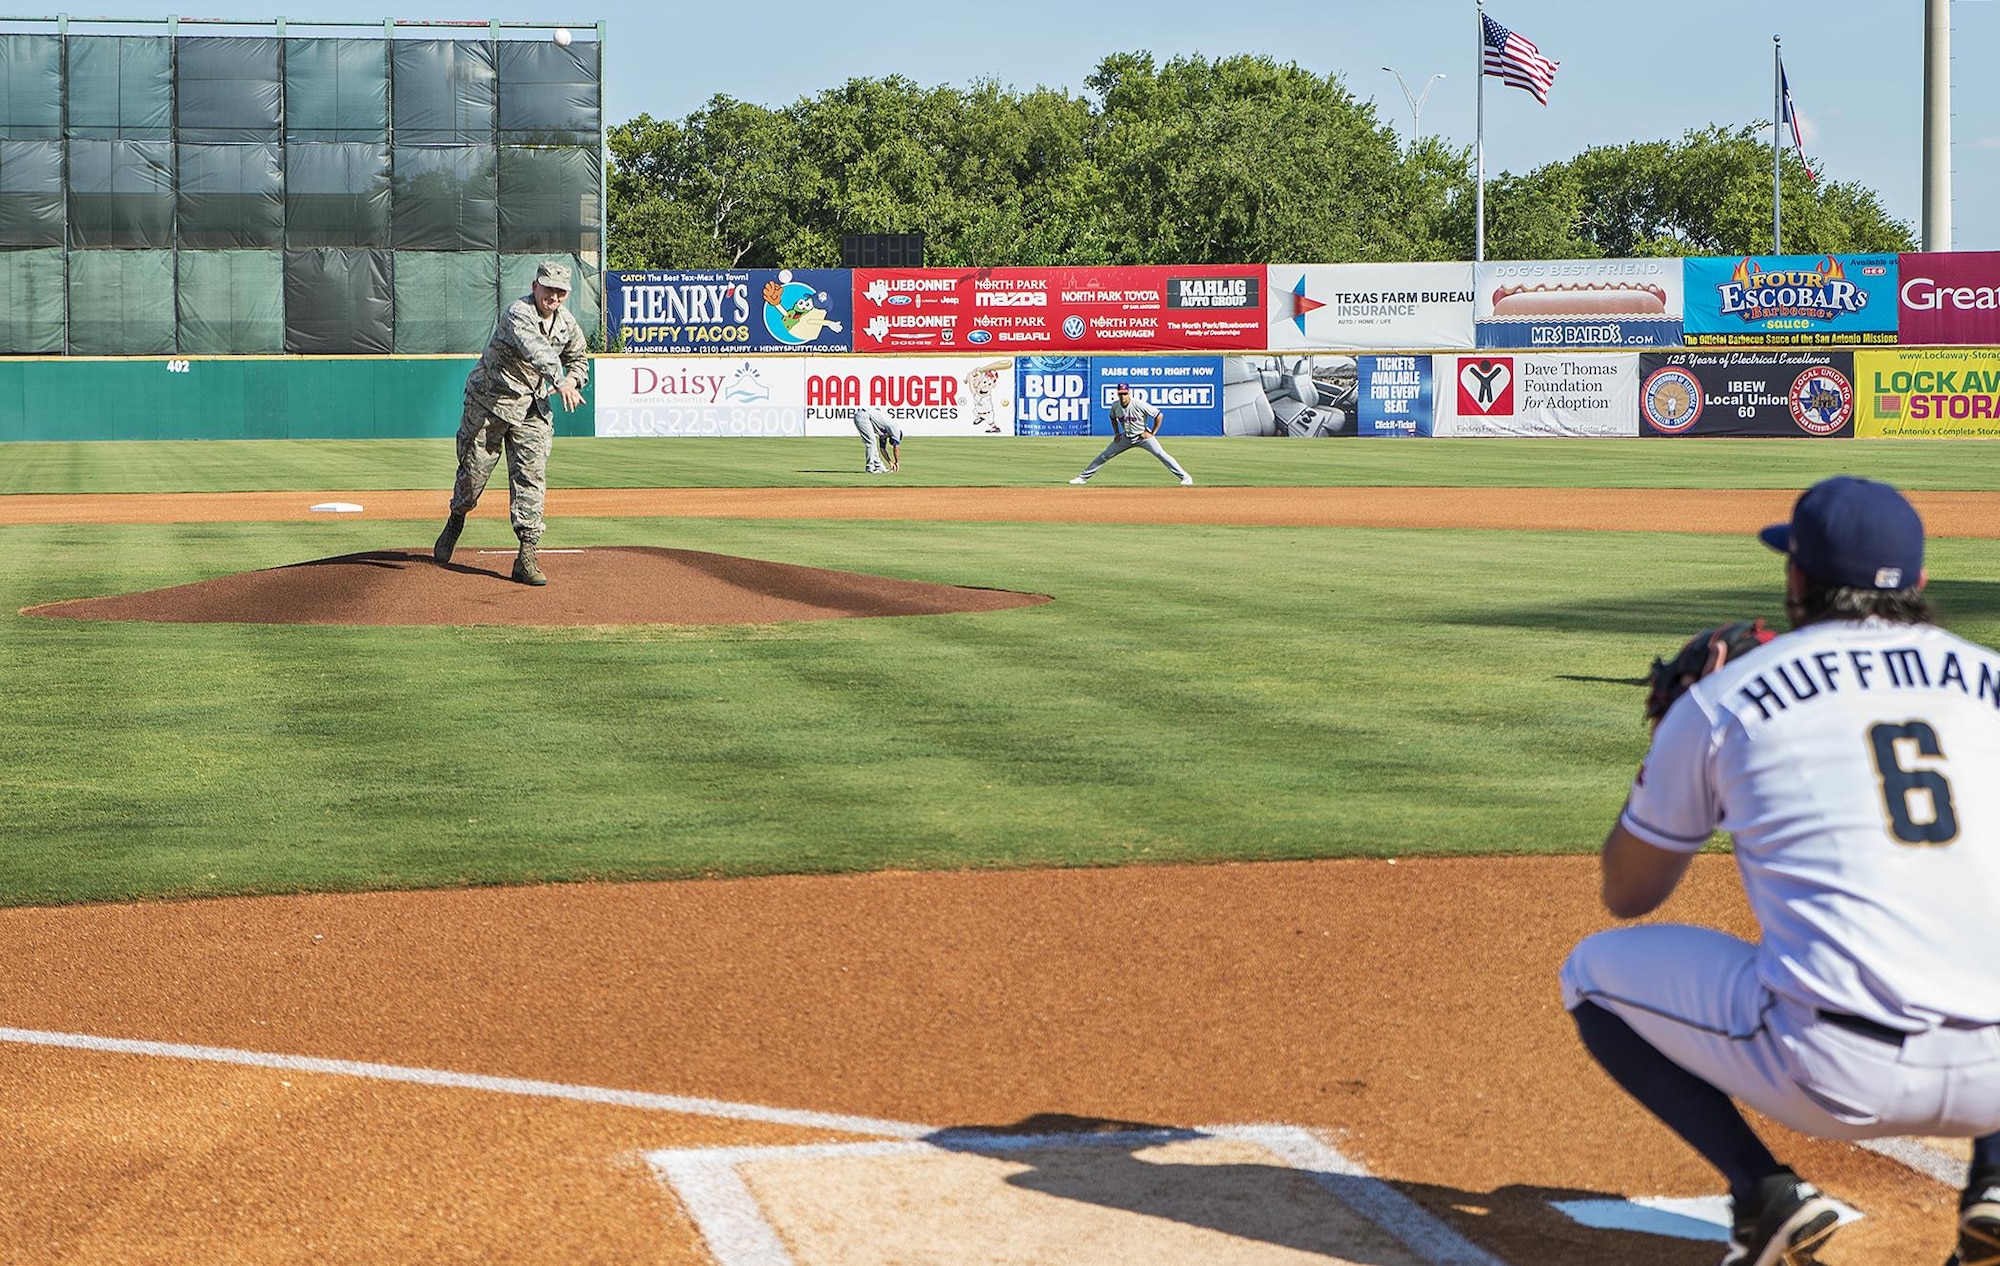 Col. Thomas K. Smith, Jr., 433rd Airlift Wing commander, throws out the first pitch during the San Antonio Missions baseball game July 16, 2017 at Nelson Wolff Stadium.  (U.S. Air Force photo by Benjamin Faske)